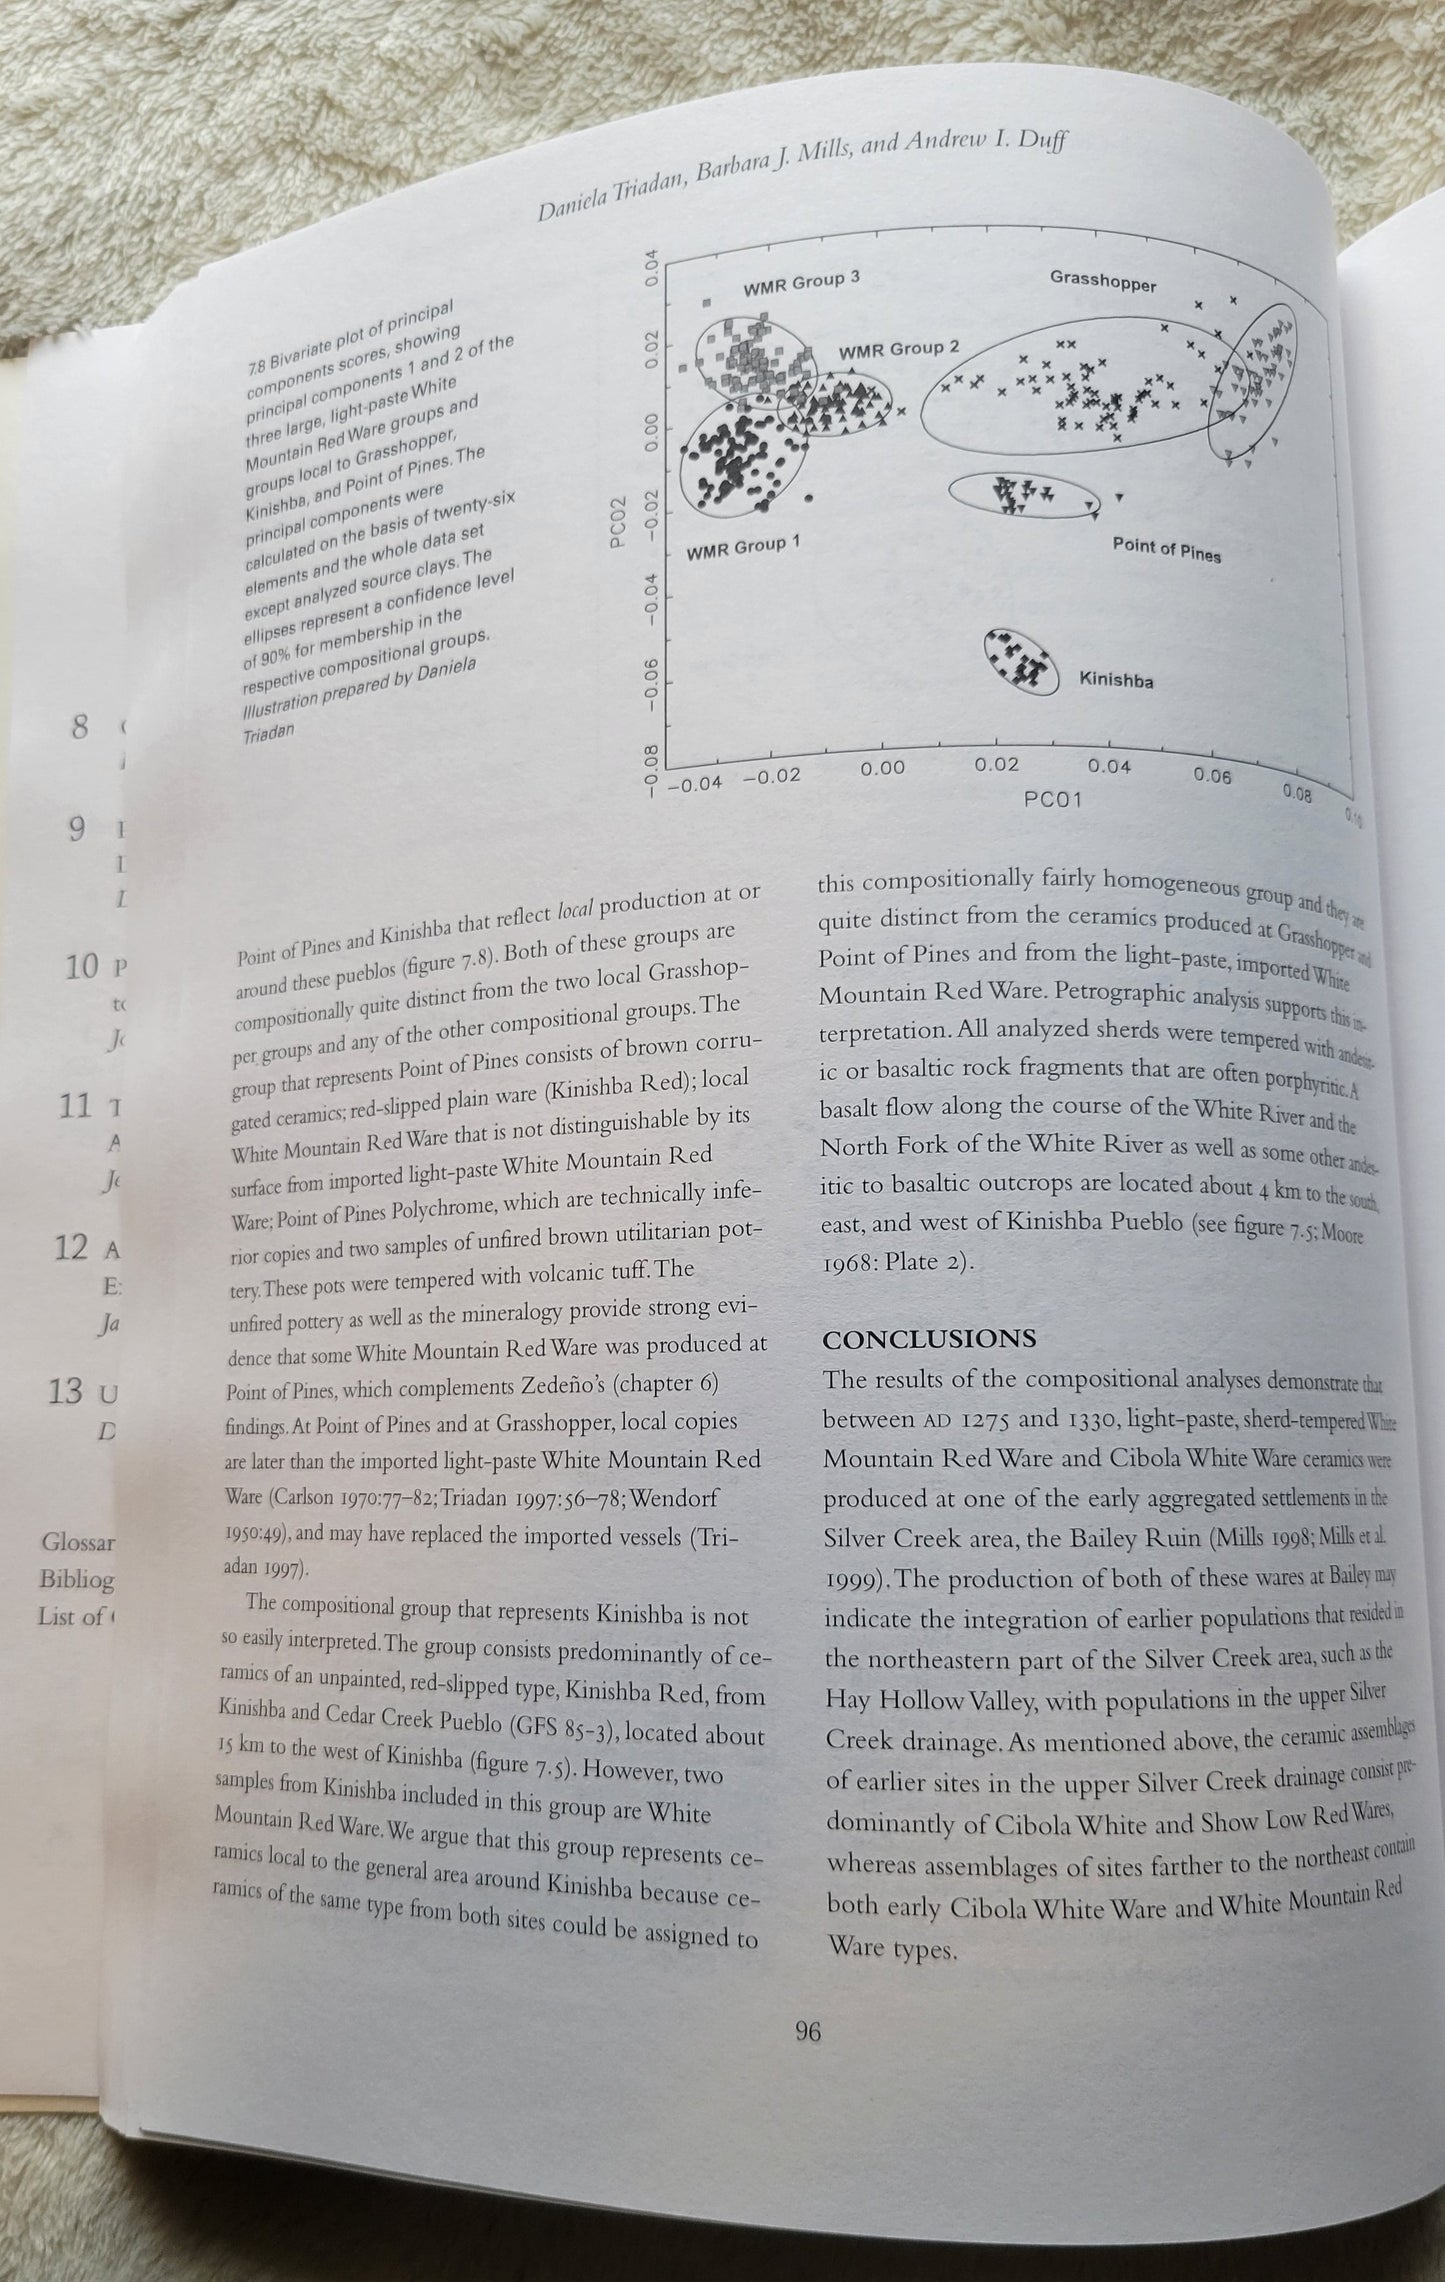 Used book.  "Ceramic Production and Circulation in the Greater Southwest: Source Determination by INAA and Complementary Mineralogical Investigations" edited by Dr. Donna M. Glowacki and Dr.Hector Neff, published by the Cotsen Institute of Archaeology at UCLA, 2002. View of page 96.